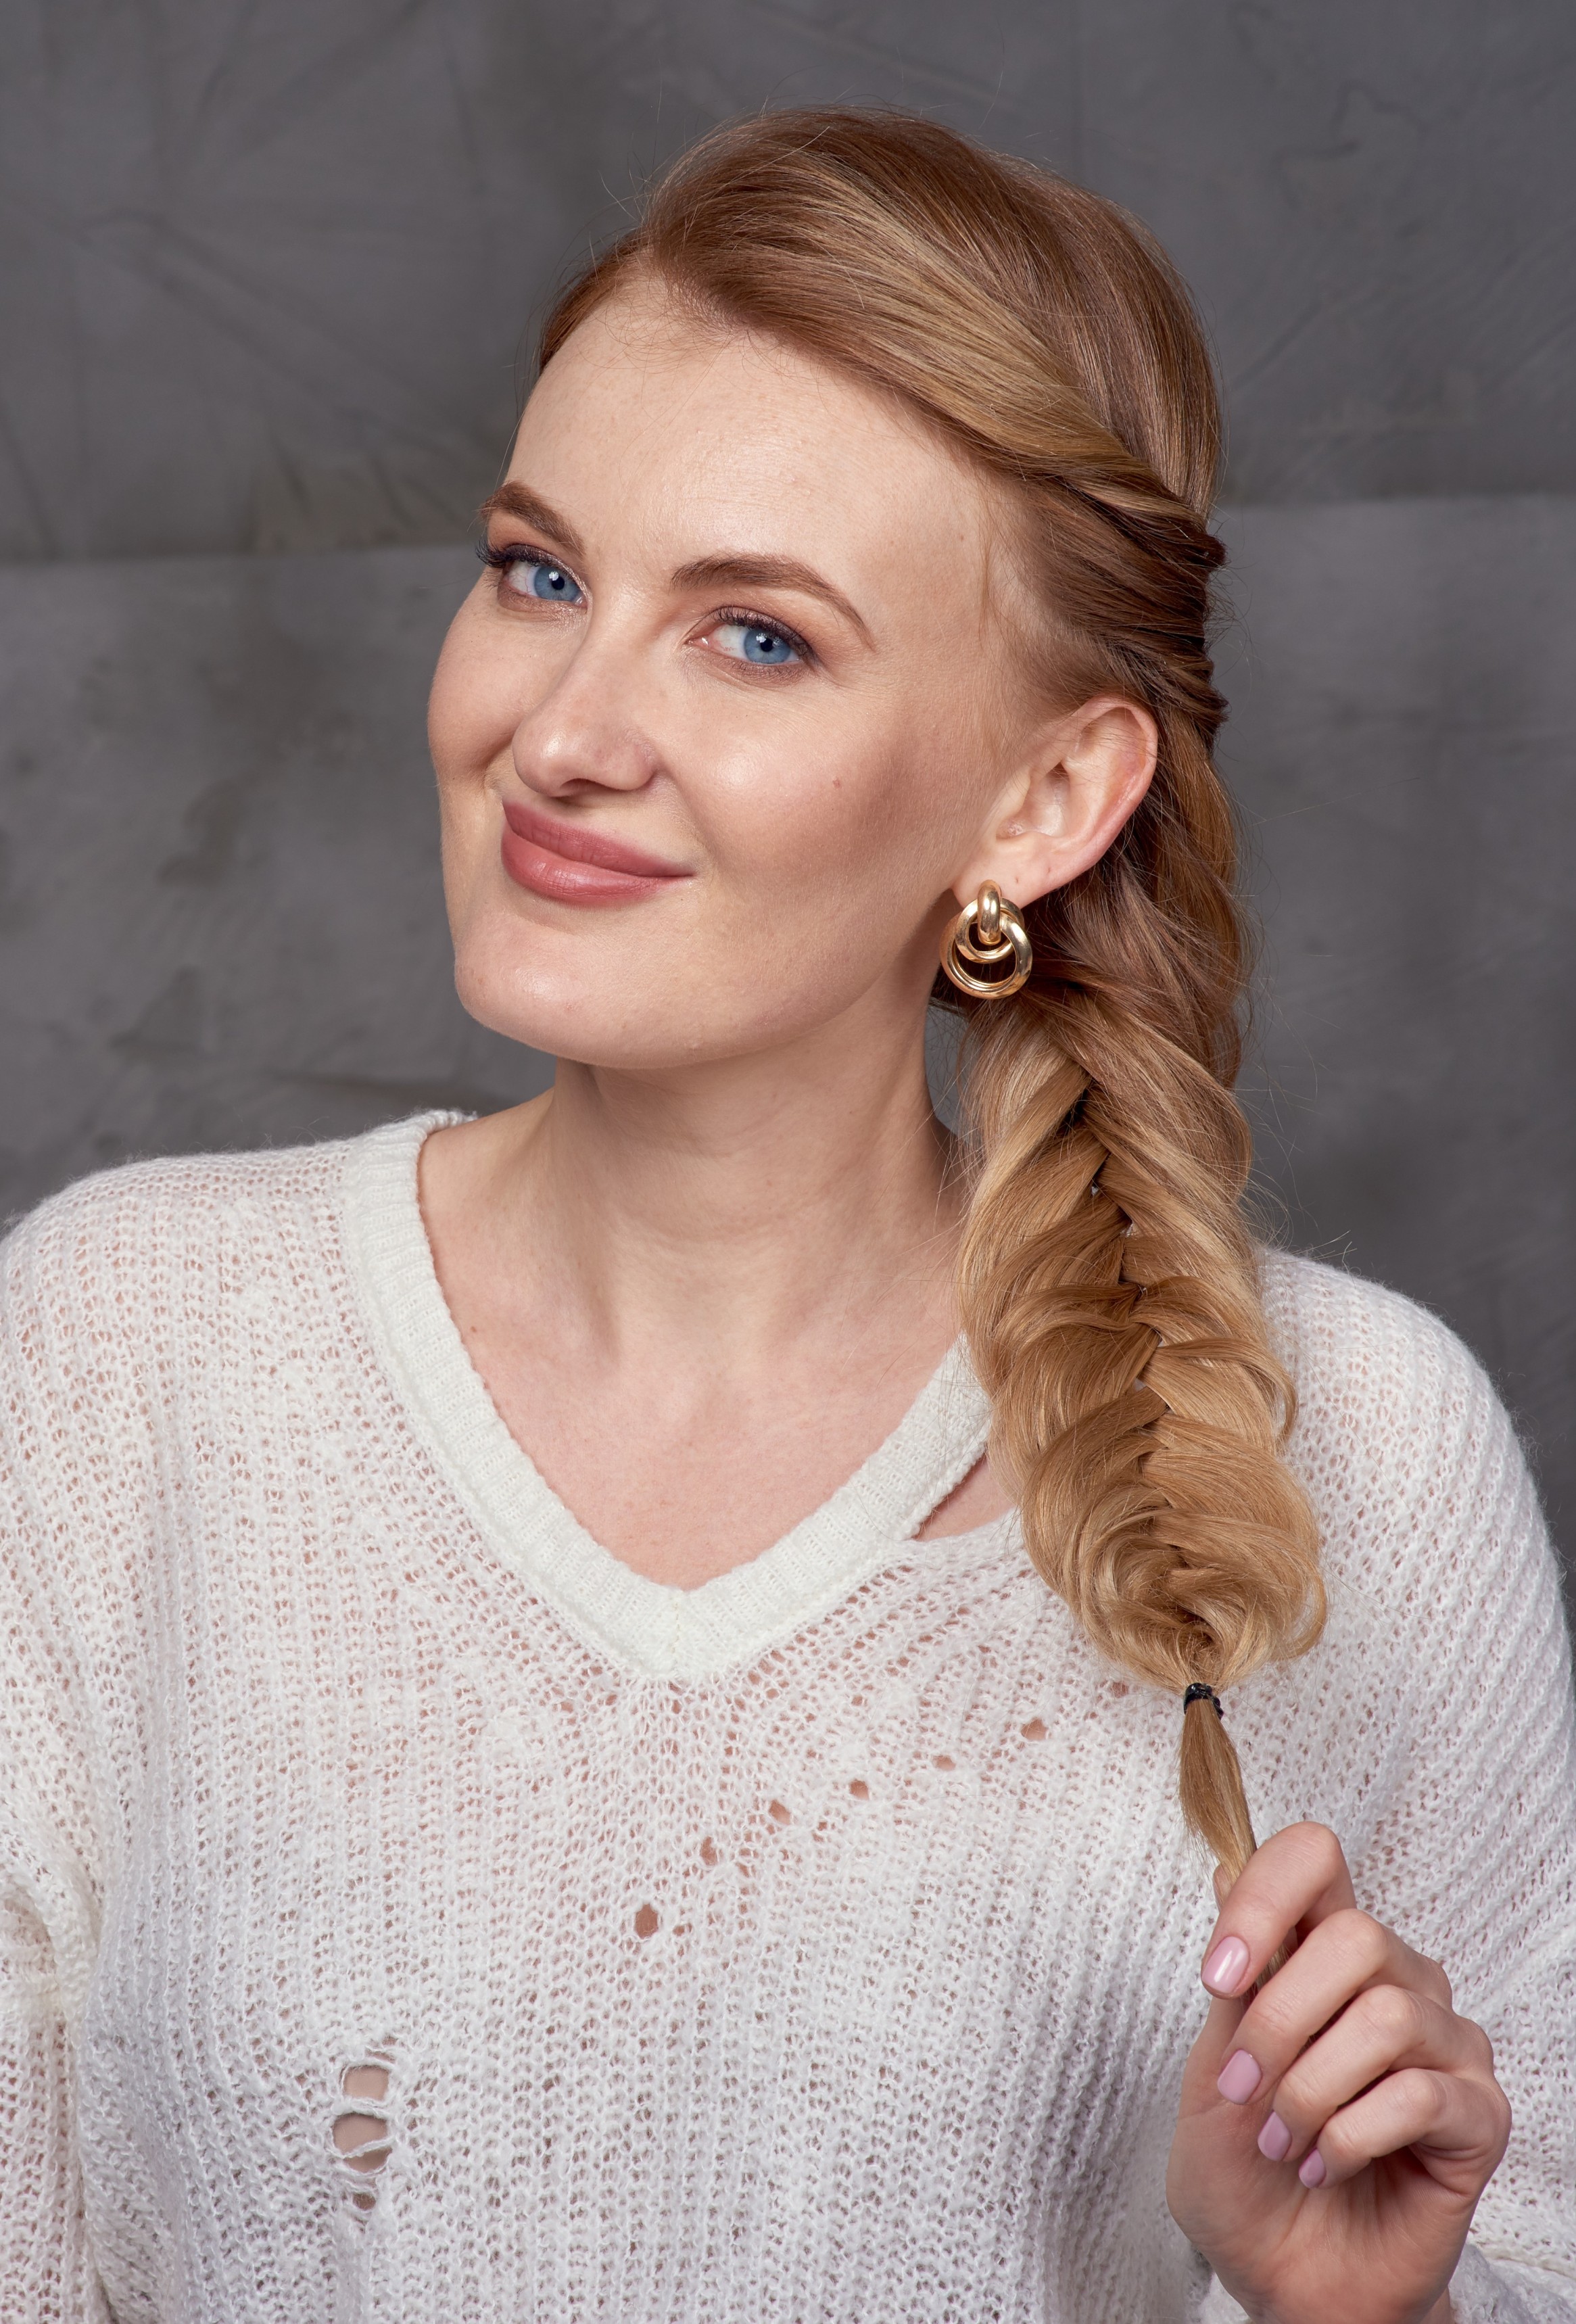 How to Do a Fishtail Braid for 3 Different Fishtail Hairstyles